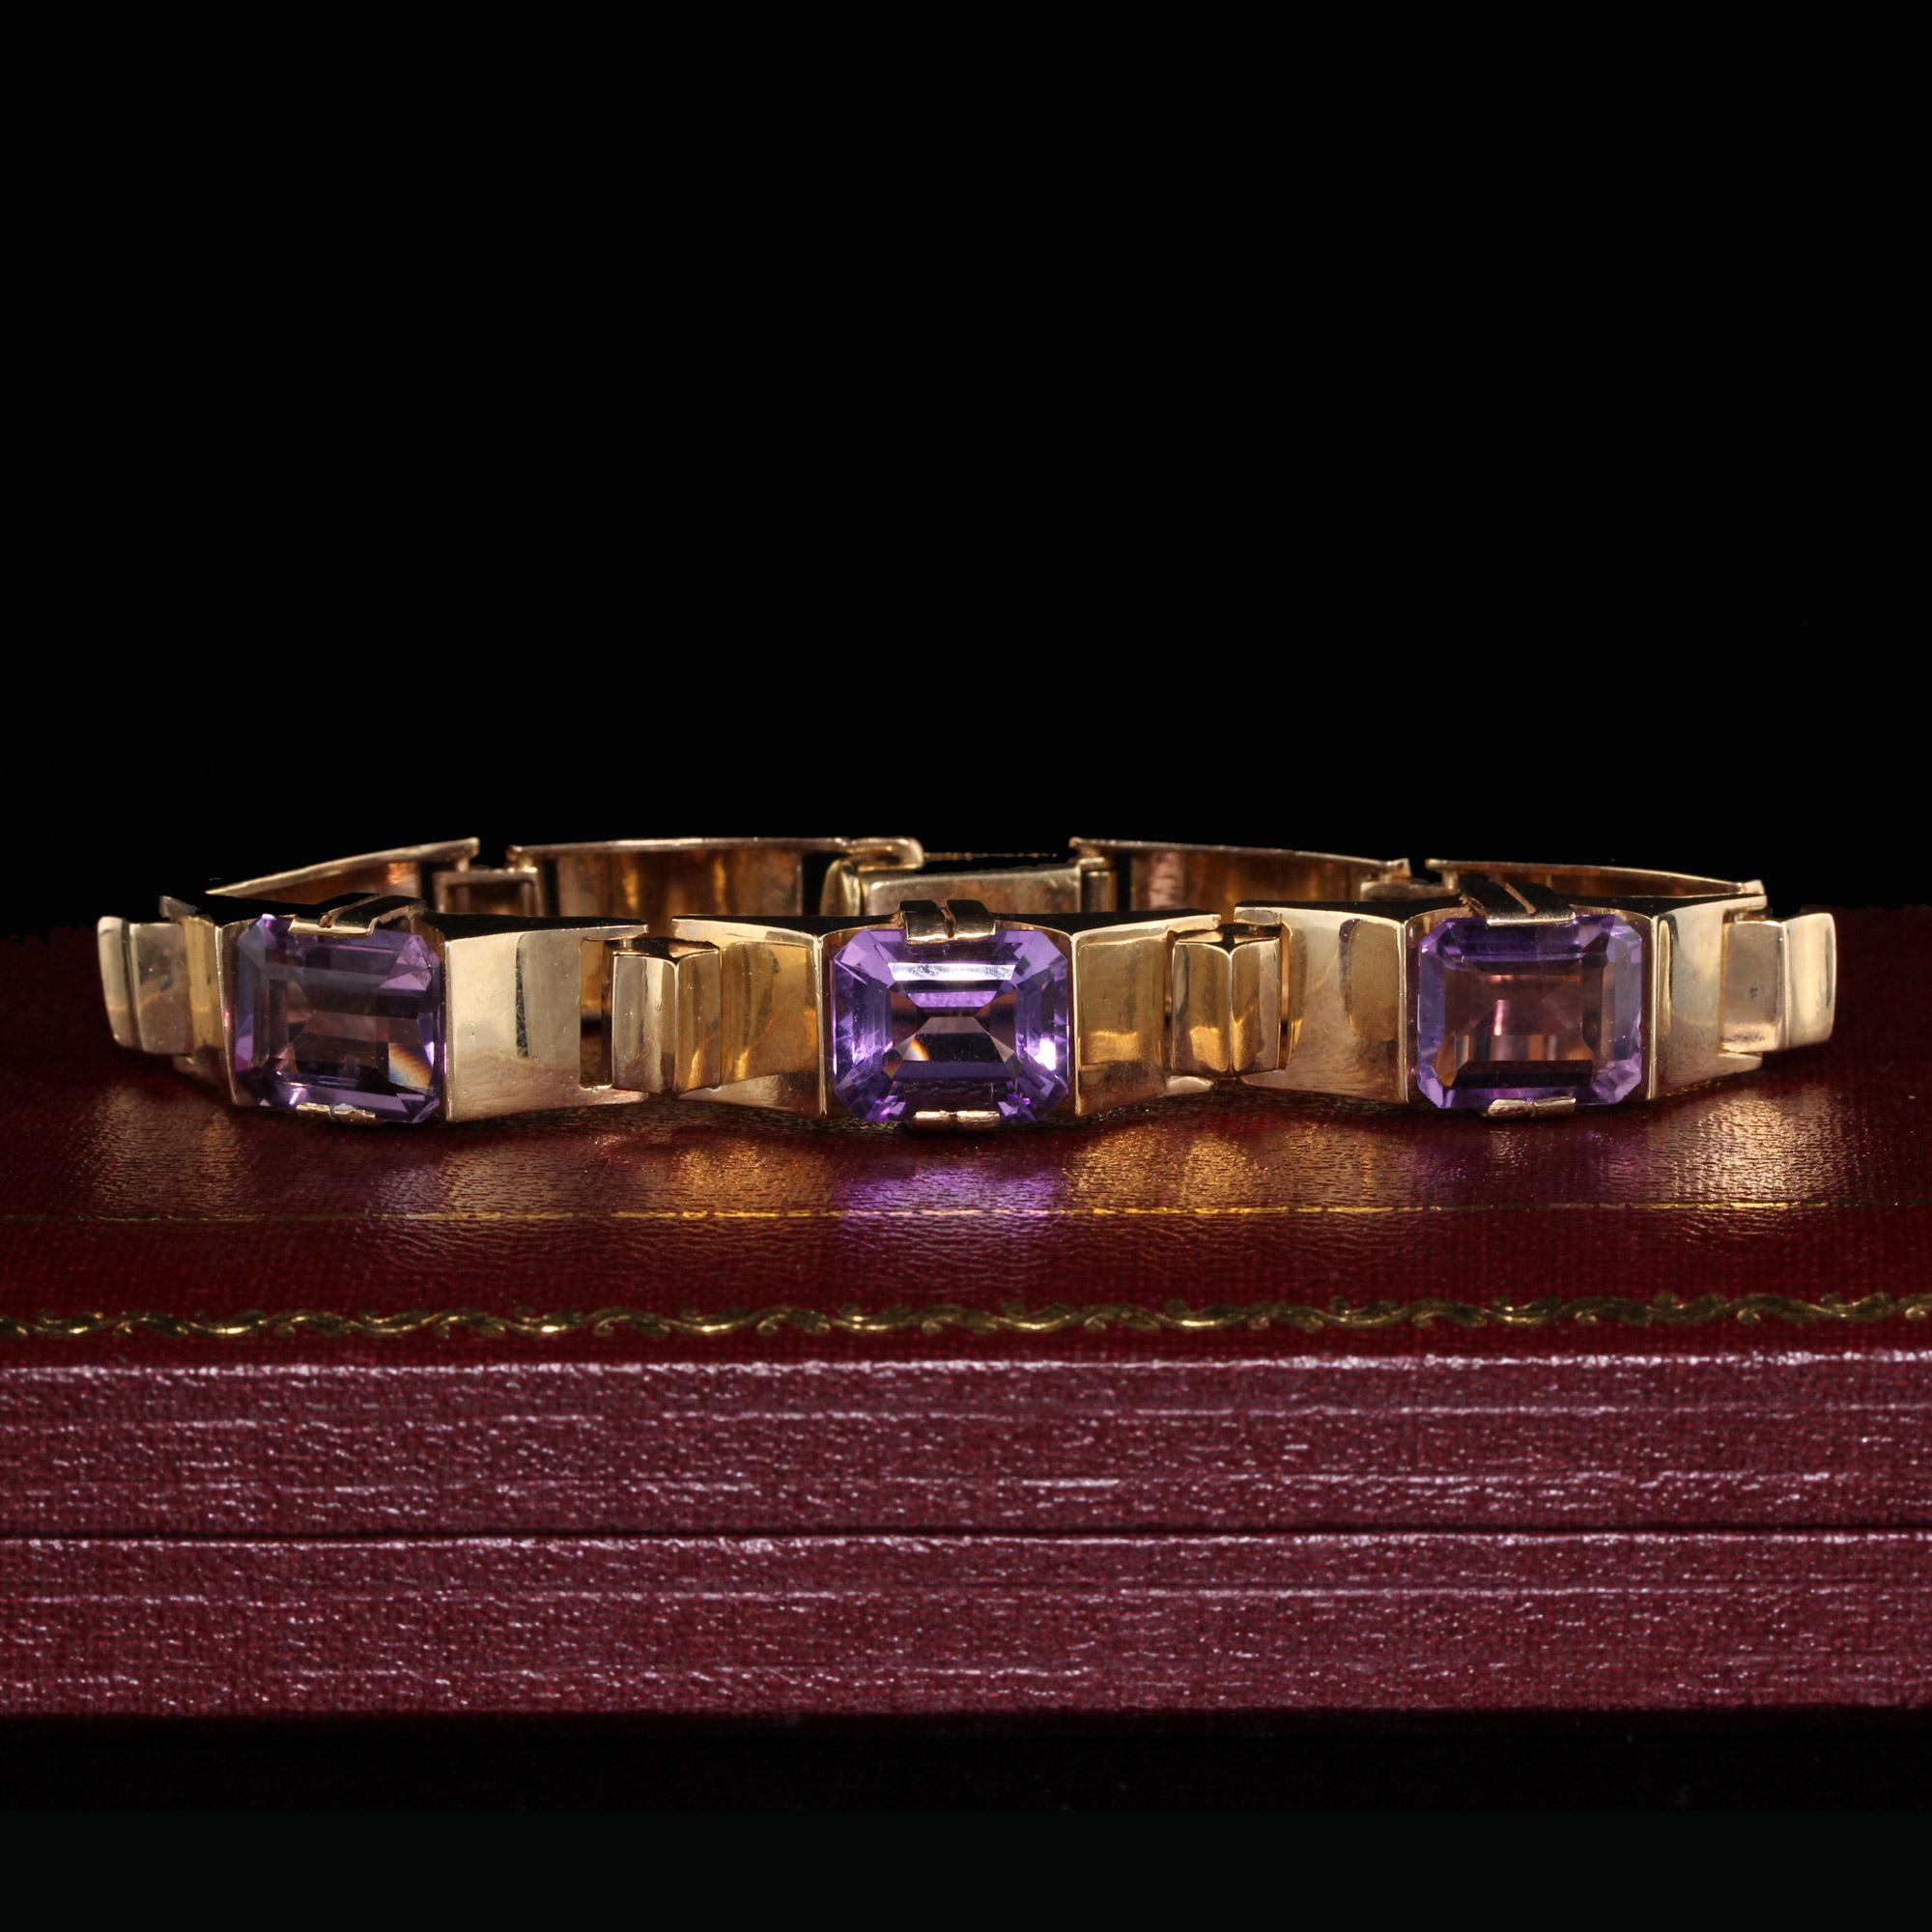 Bold and beautiful vintage gold & amethyst bracelet!

Metal: 14K Yellow Gold

Weight: 30.9 Grams

Gemstone Weight: Approximately 18 cts of amethyst

Measurements: Length measures 7.25 inches. Width measures 11.51 mm.